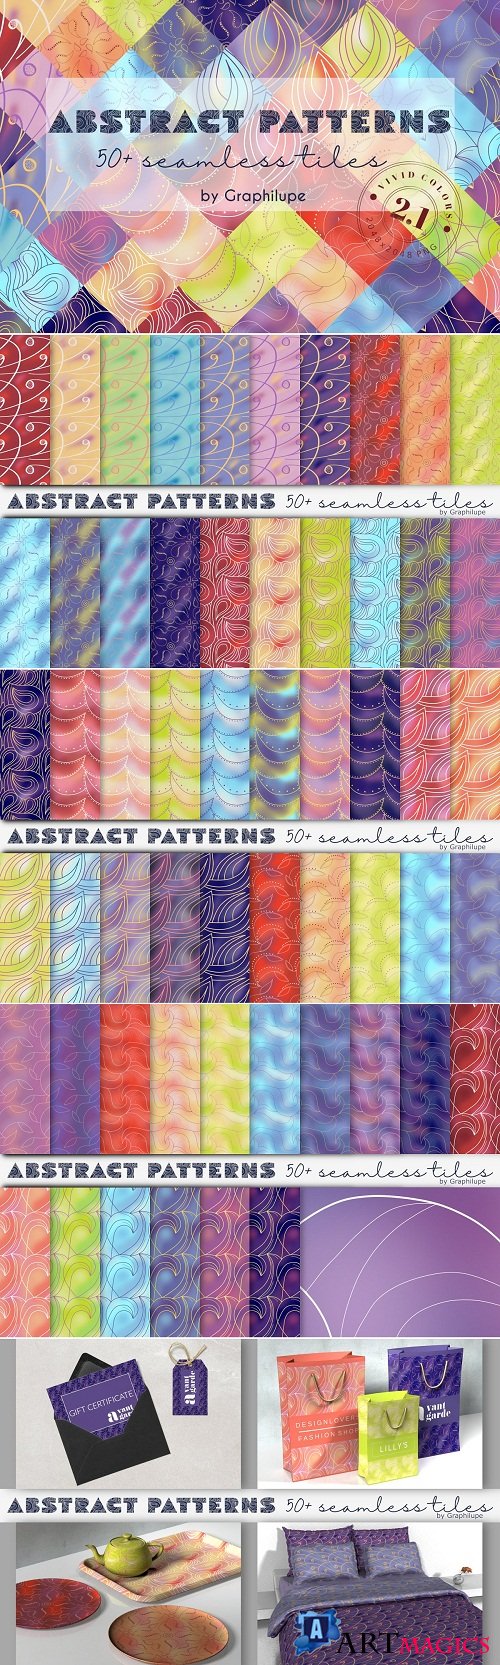 Abstract Patterns Vol. 2.1 - 3271261